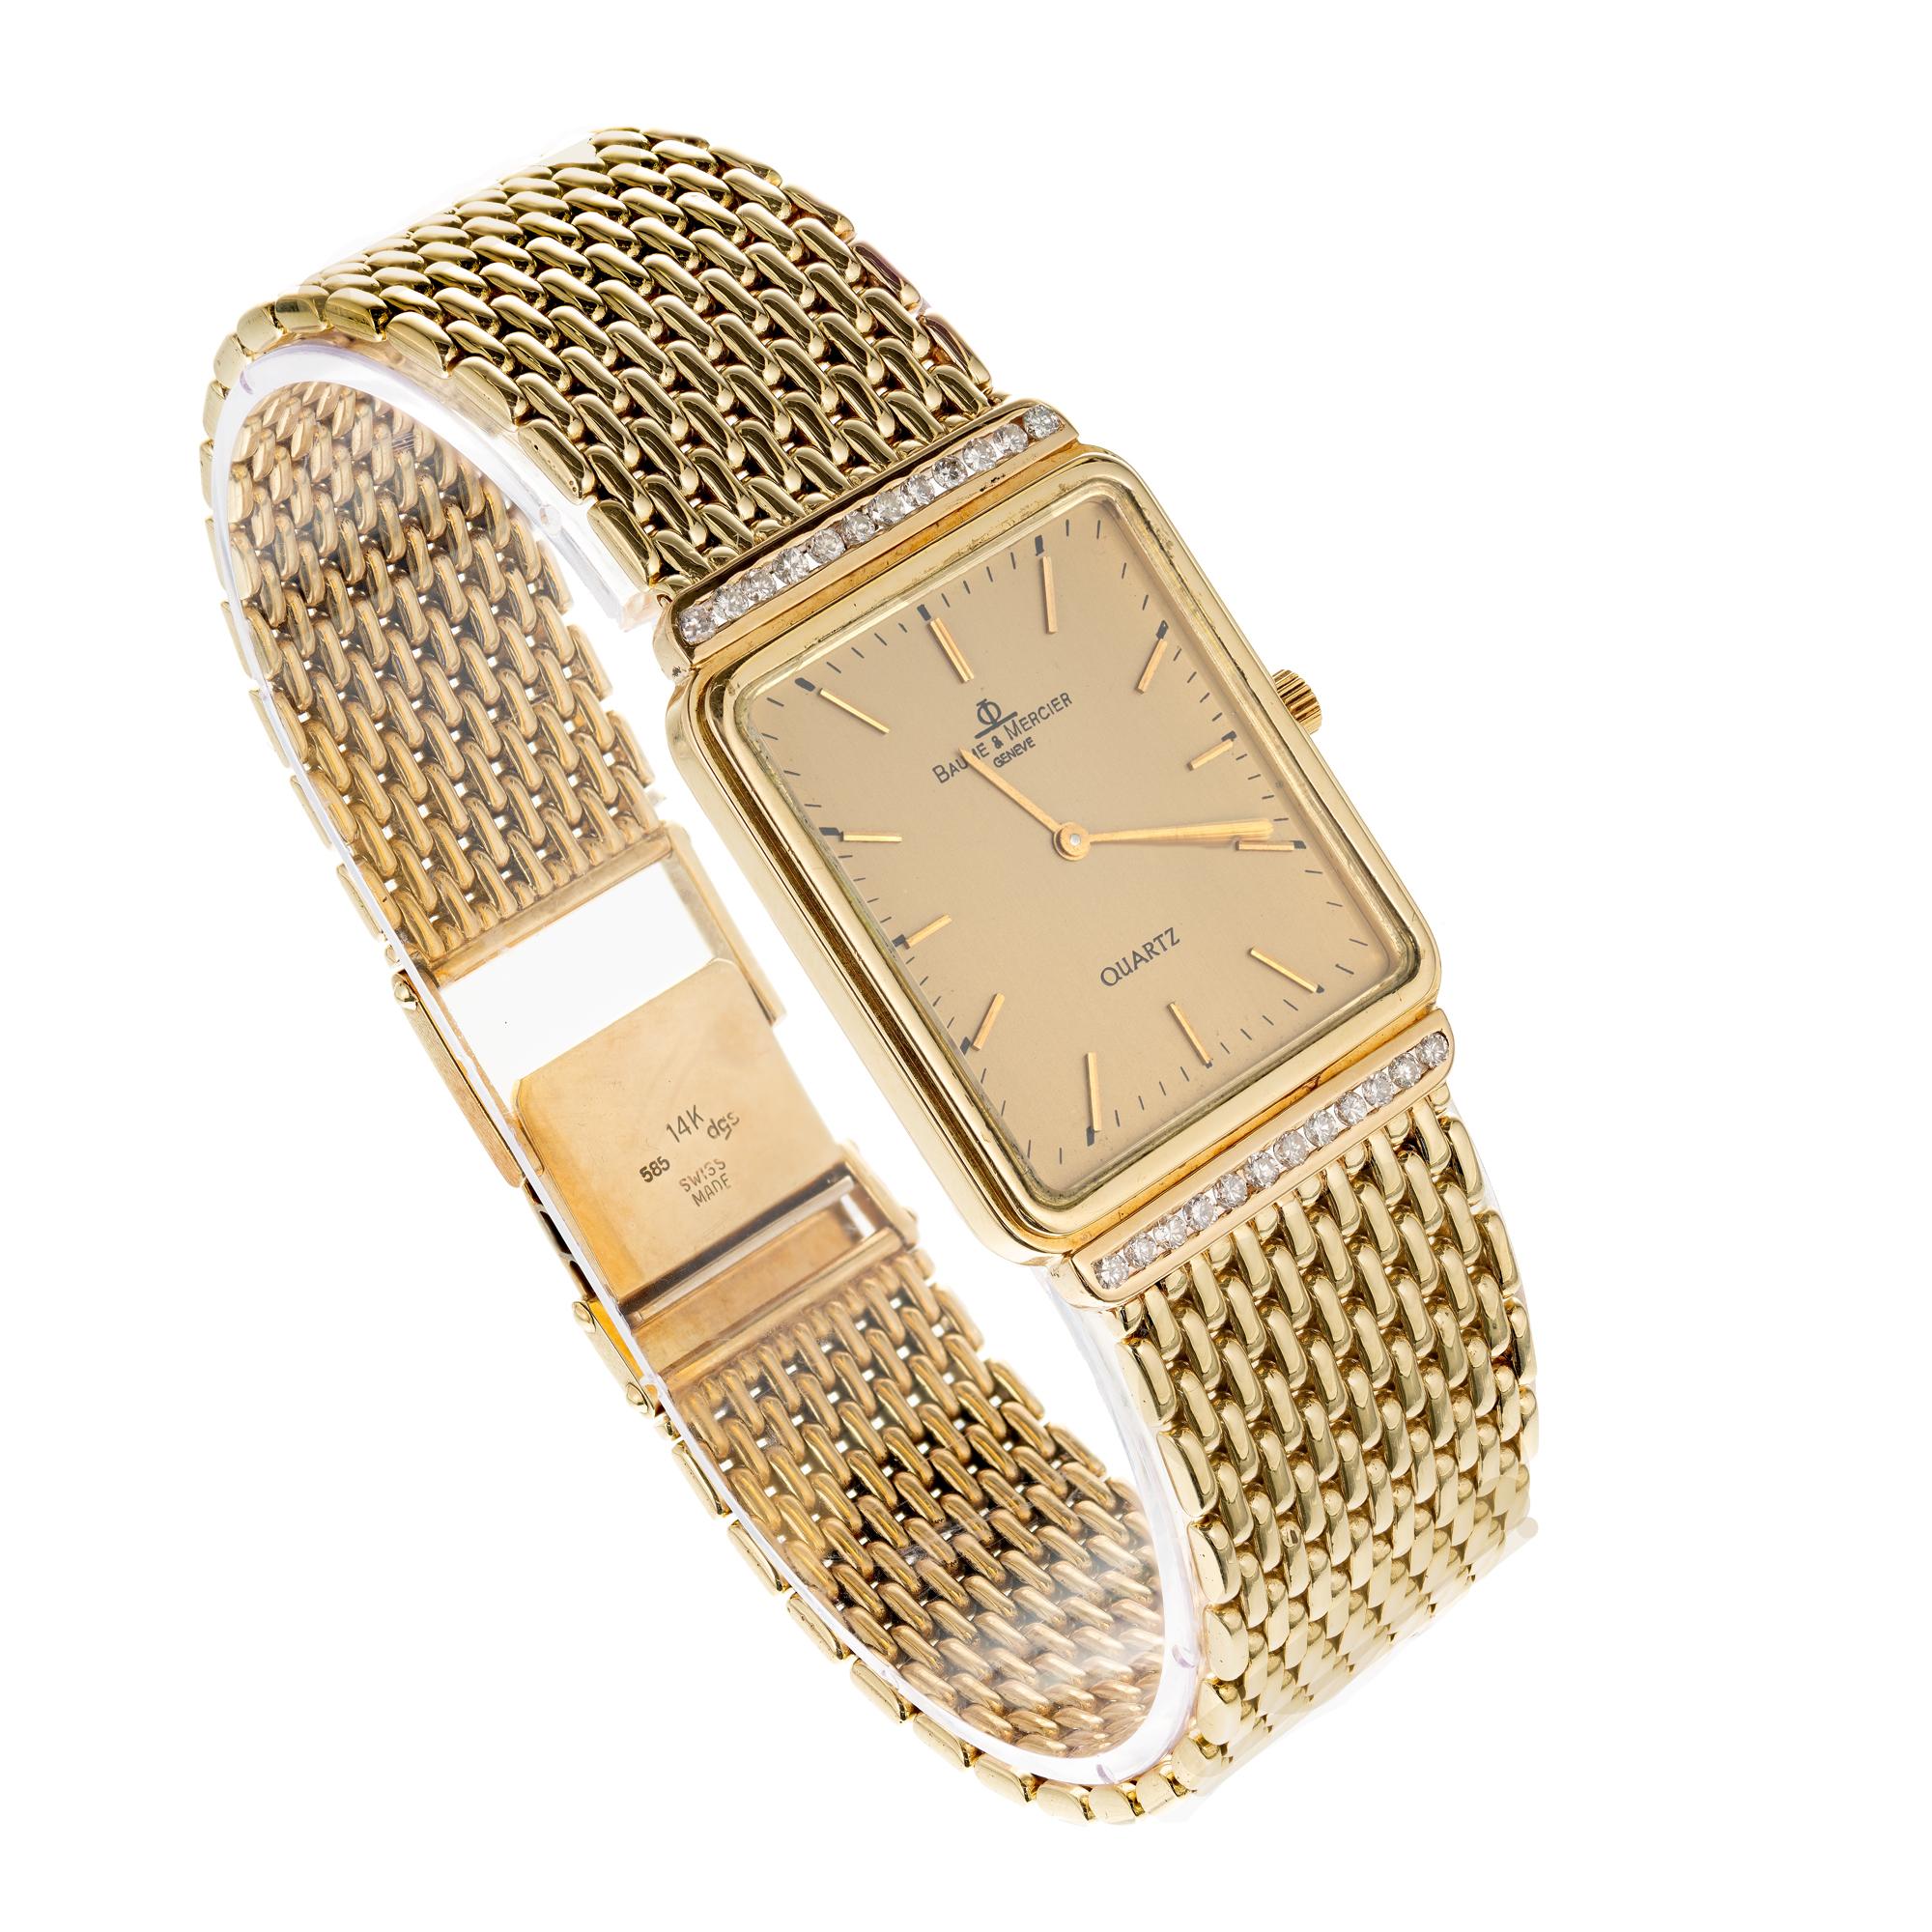 Baume & Mercier unisex 14k Yellow Gold watch with mesh band and diamond accents. Quartz movement. 

24 round full cut diamonds, Approximate .40ct
Length: 7.75 Inches long- can be shortened
Length: 33.47mm
Width: 24.60mm
Band width at case: